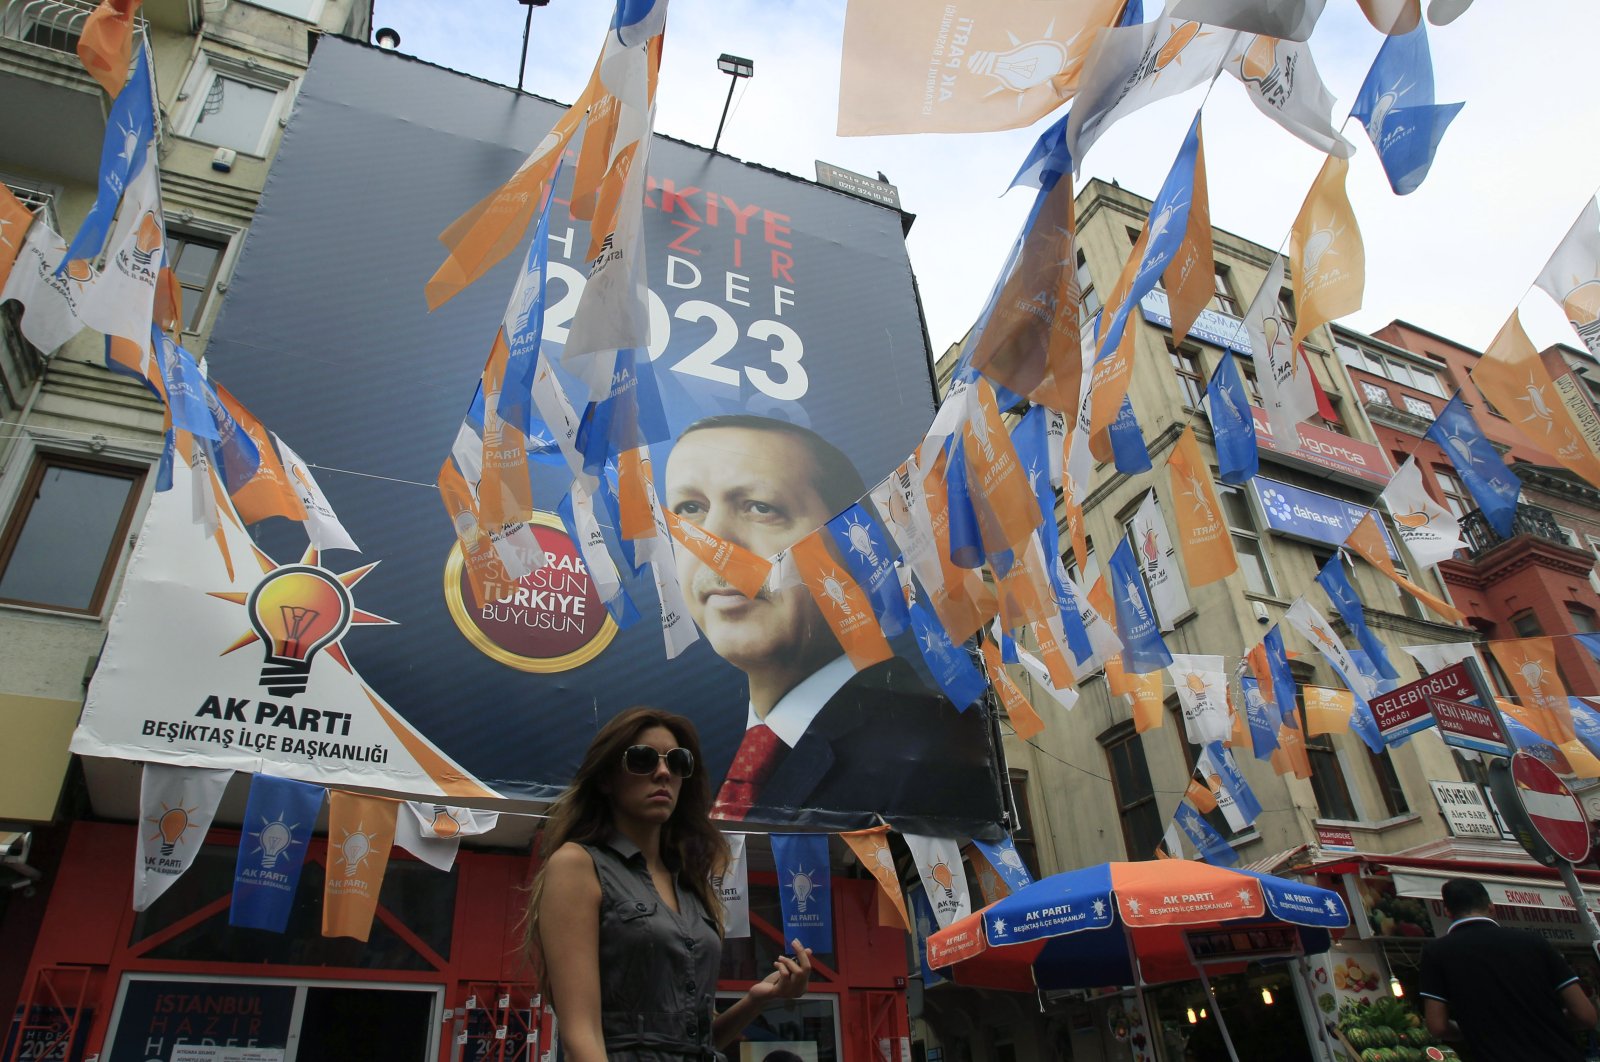 A pedestrian passes an election center for the AK Party displaying a photo of Recep Tayyip Erdoğan, in Istanbul, Saturday, June 11, 2011. (AP Photo)